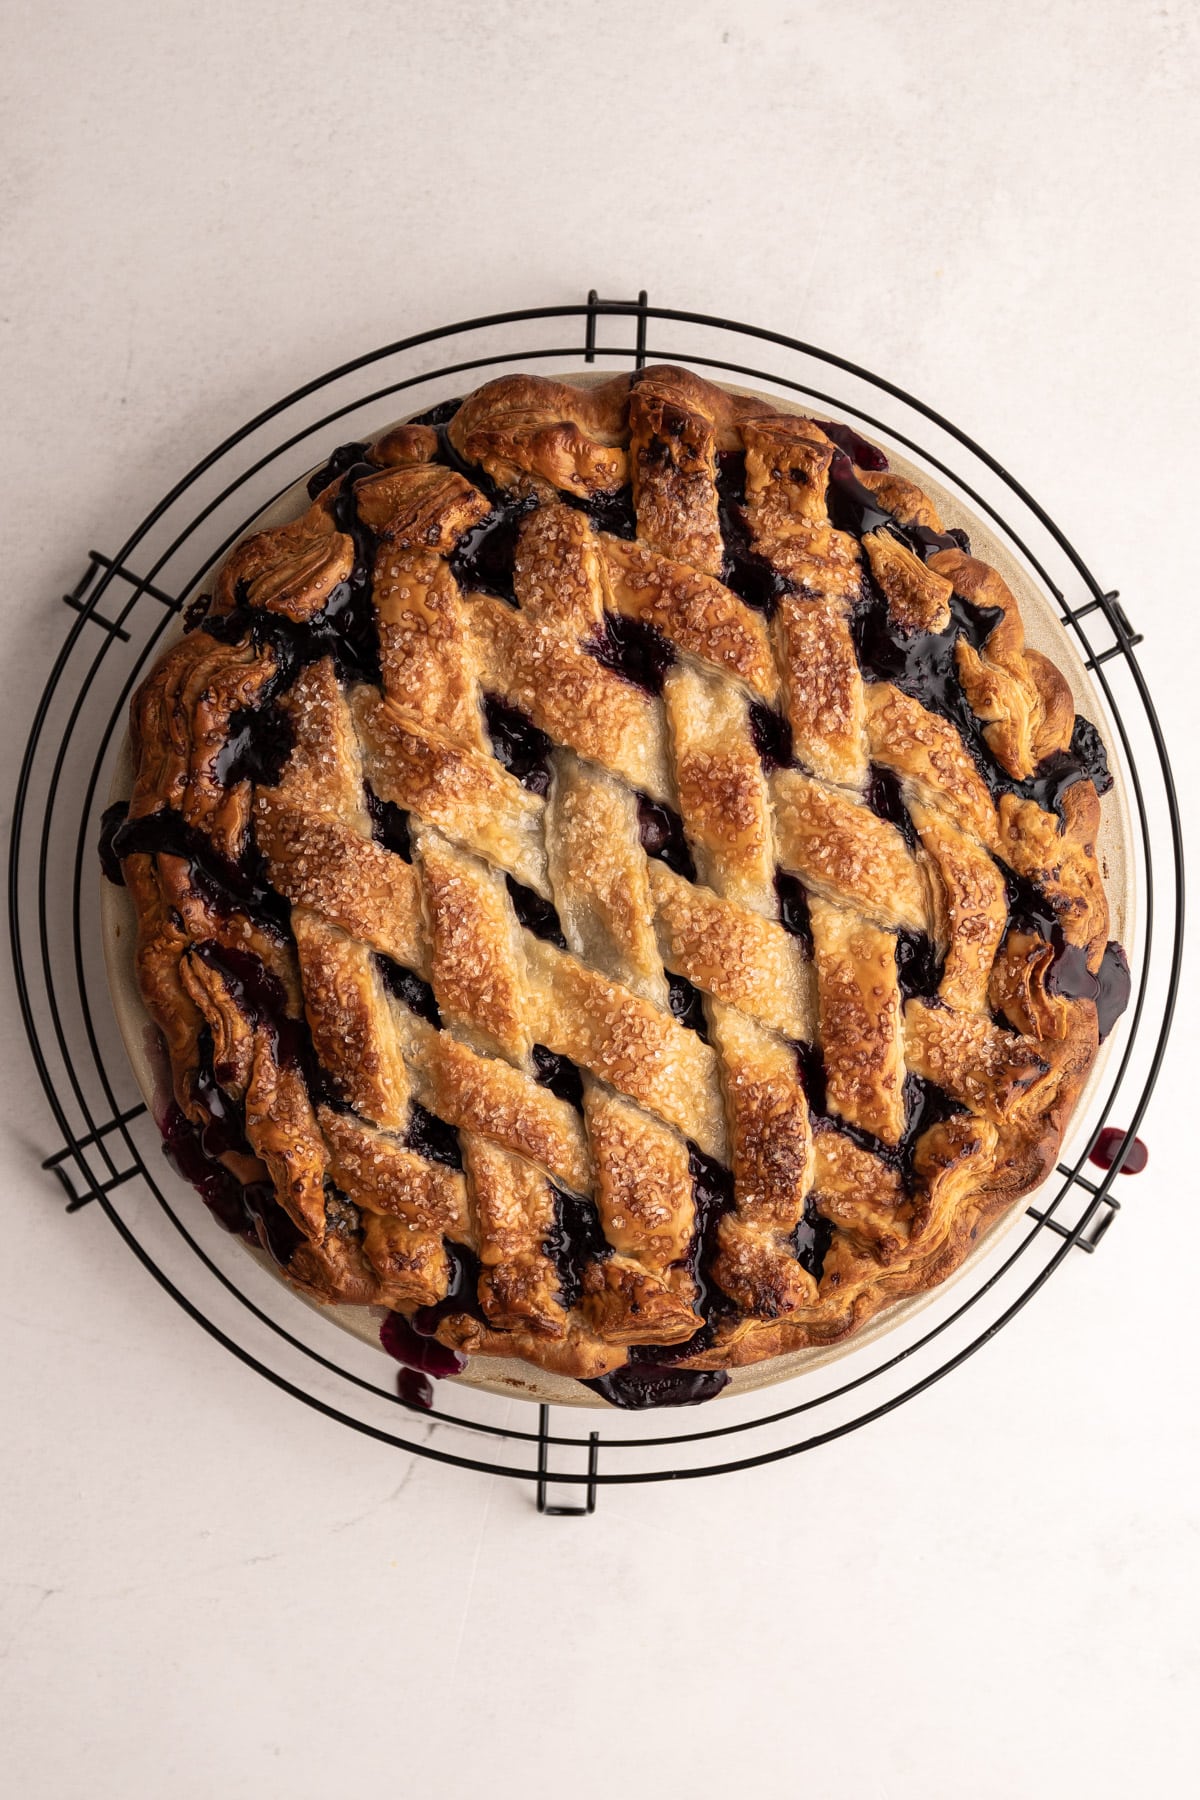 A fully baked blueberry pie.